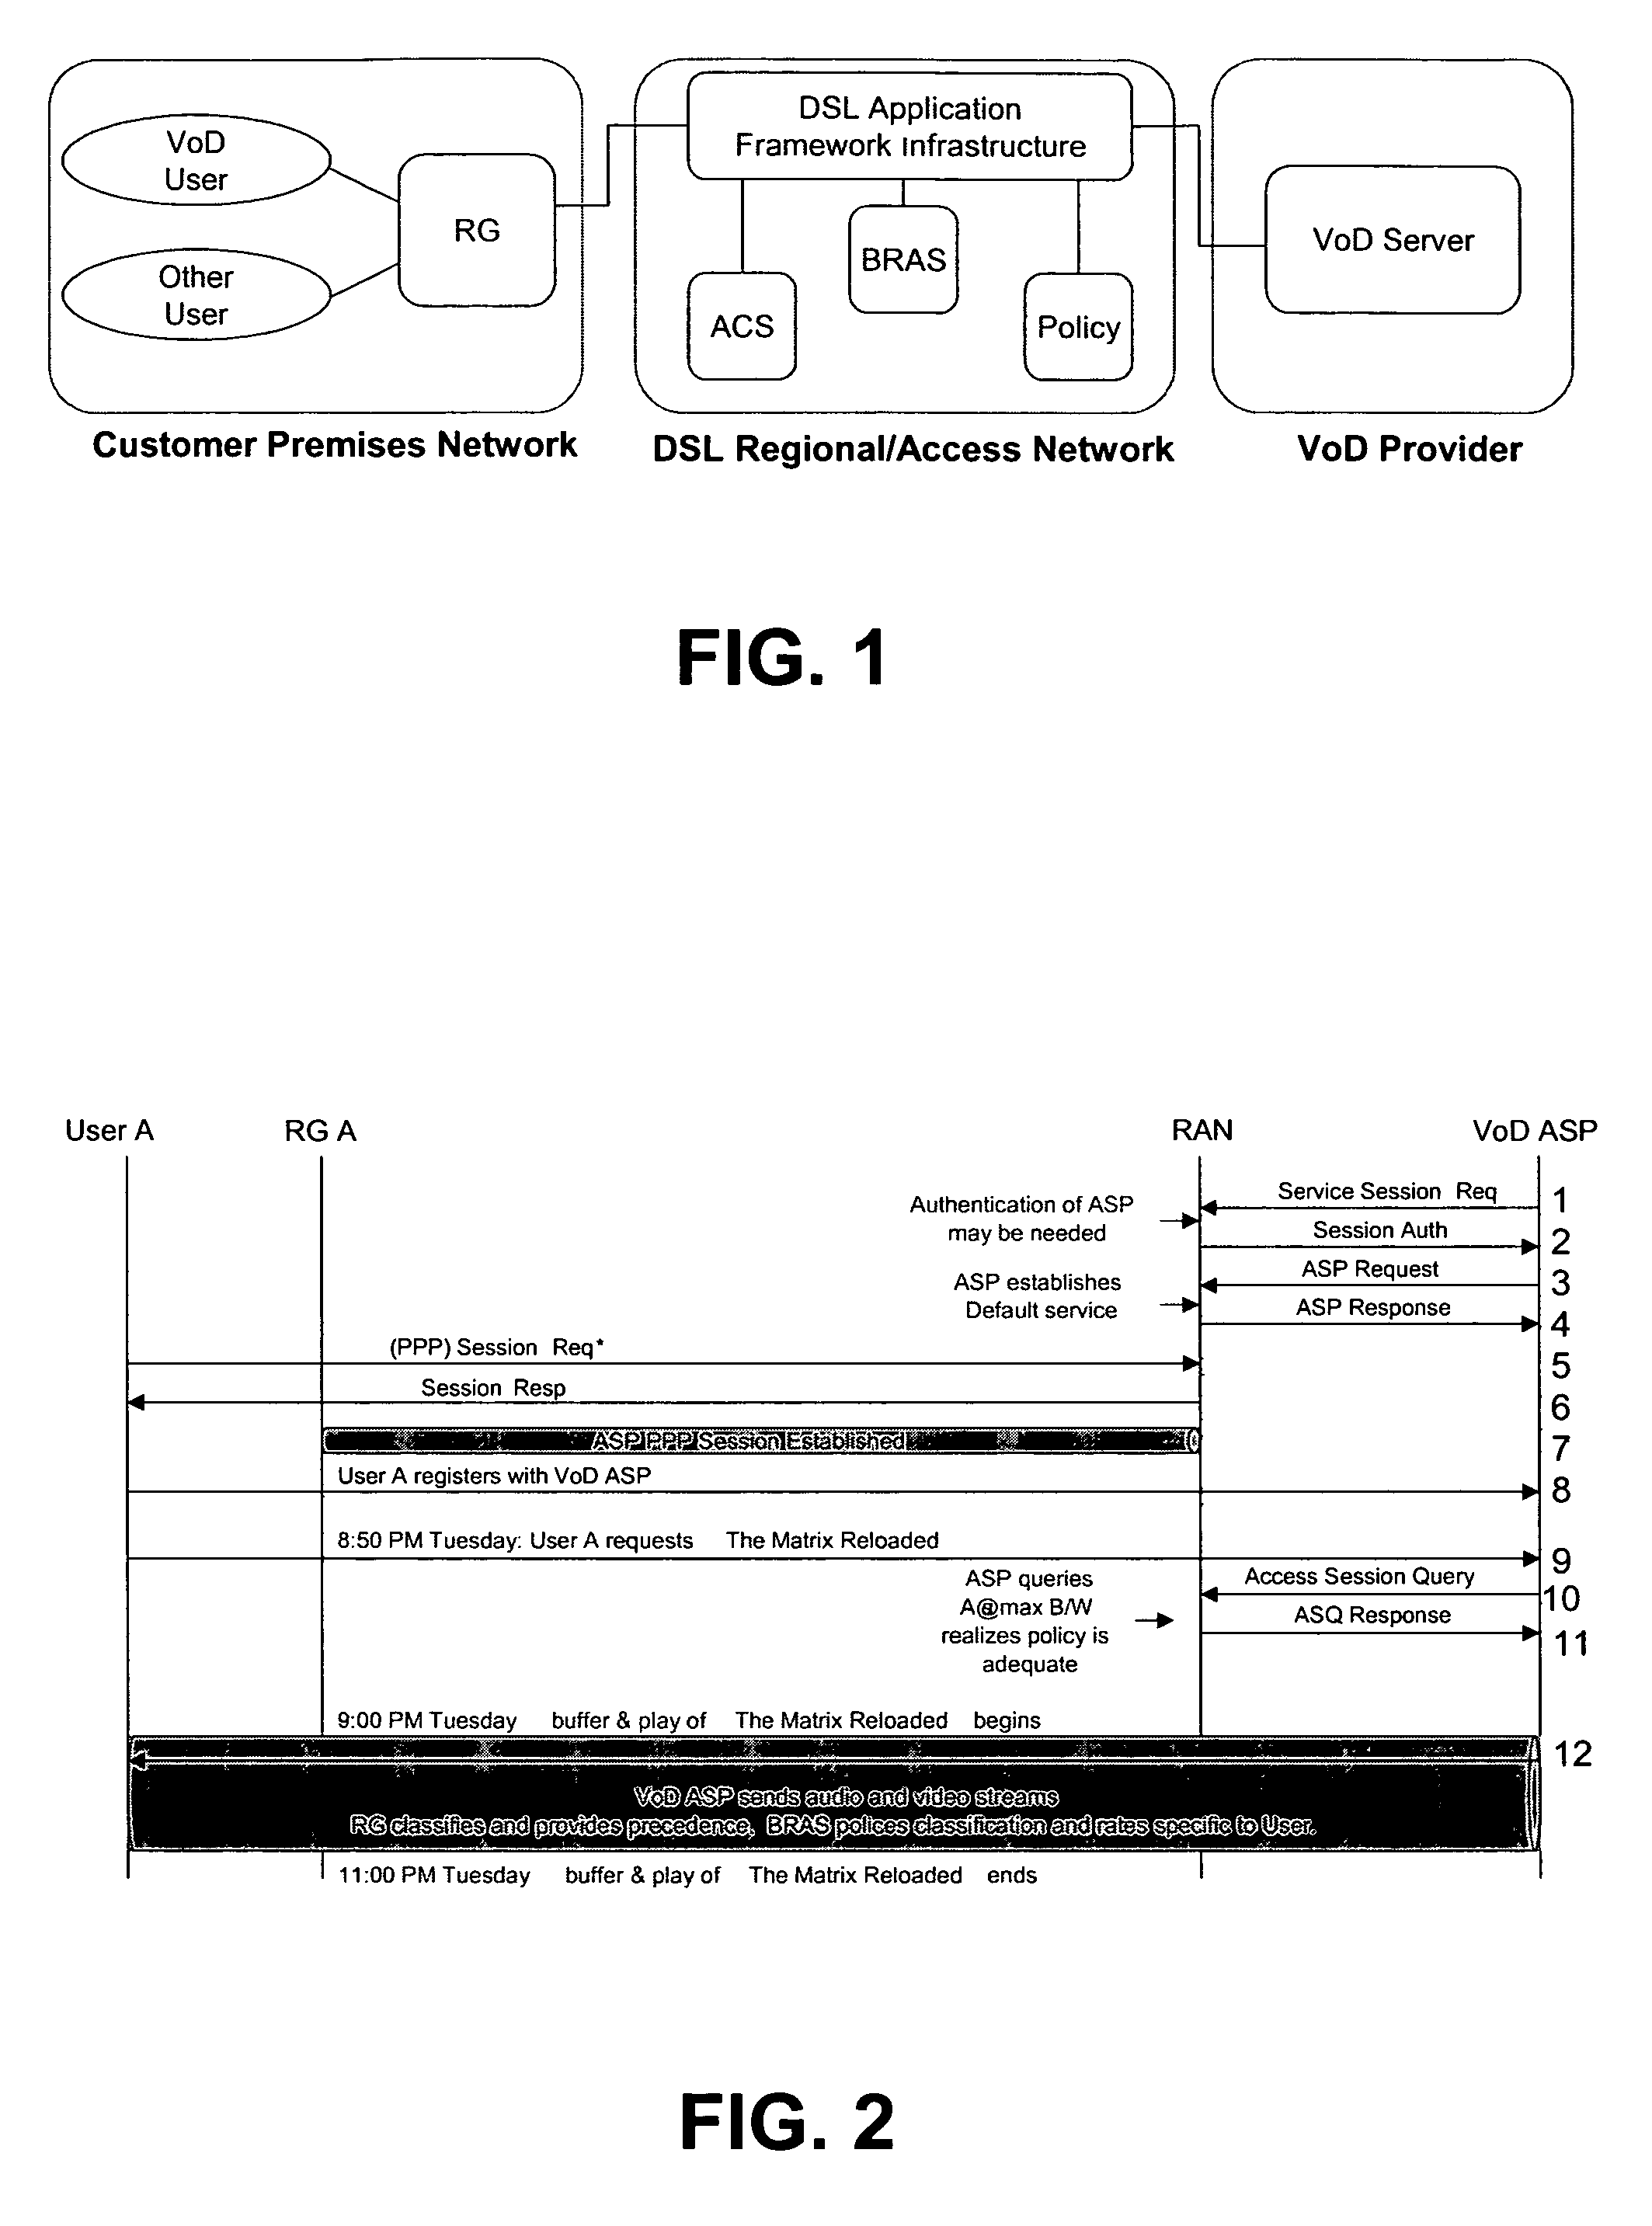 Methods and systems for providing video on demand over a communication network using managed quality of service, bandwidth allocation and/or user profiles